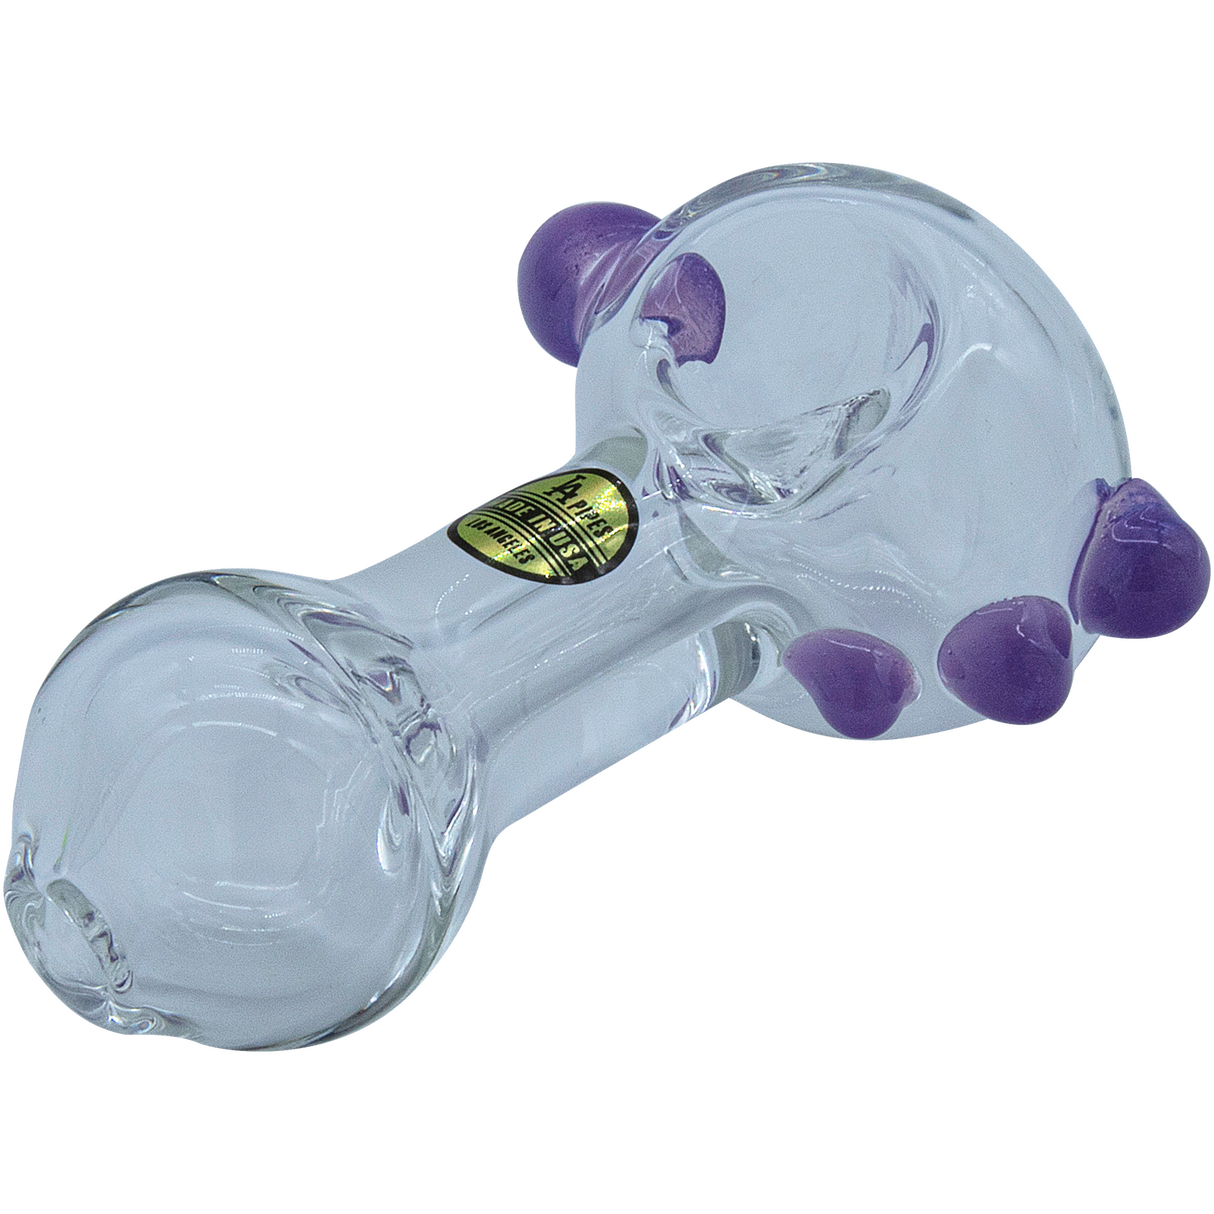 LA Pipes Thick Glass Spoon Pipe in Wisteria, 4" Borosilicate with Side View